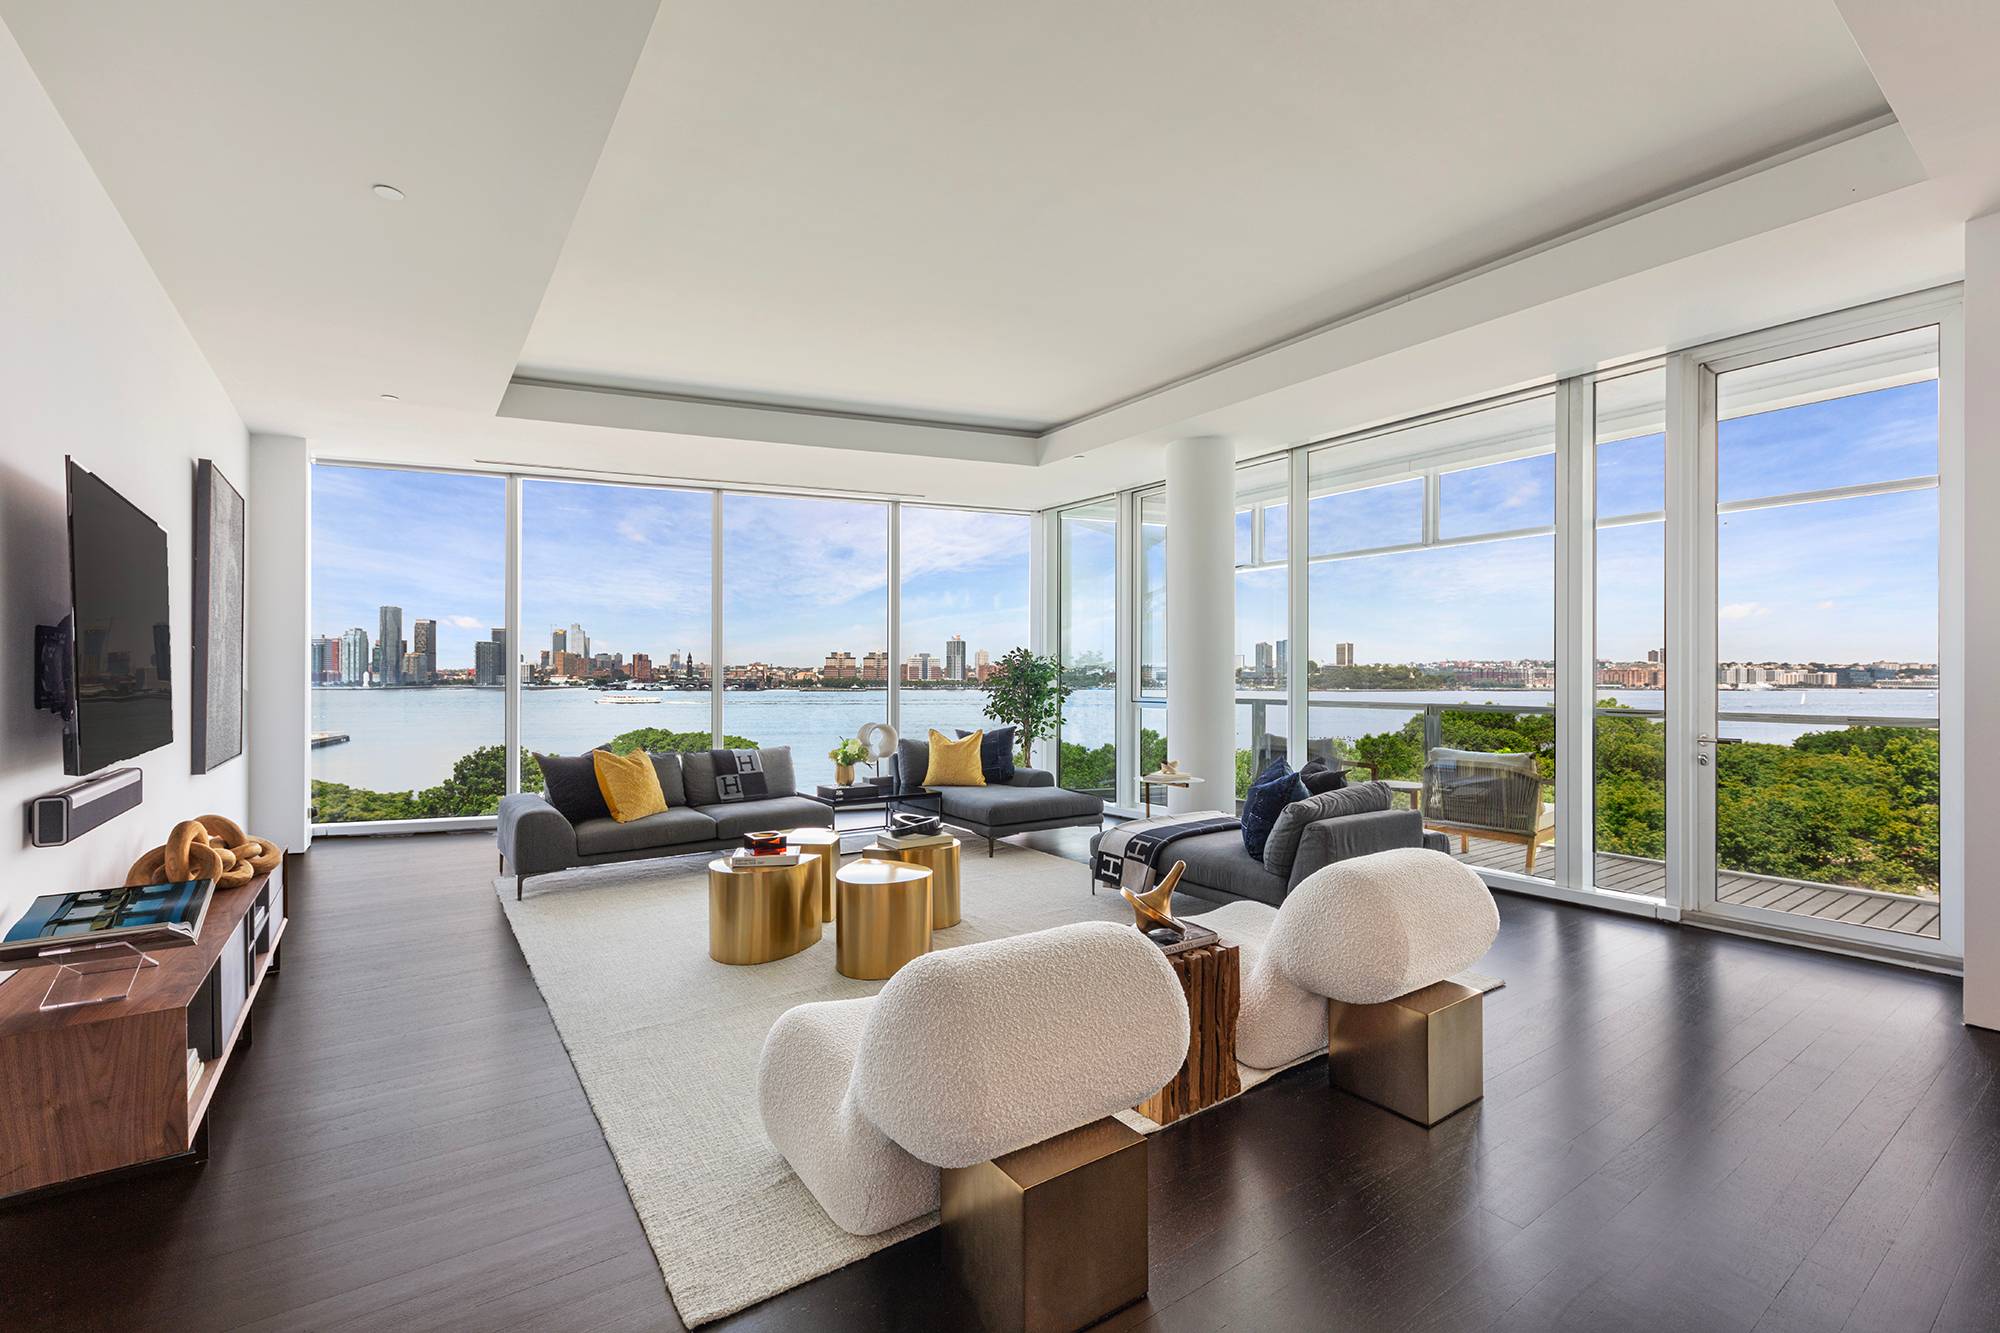 Impeccably designed and awash with natural light, this modern showplace in the luxurious Richard Meier condominium, 165 Charles, is a West Village dream residence.